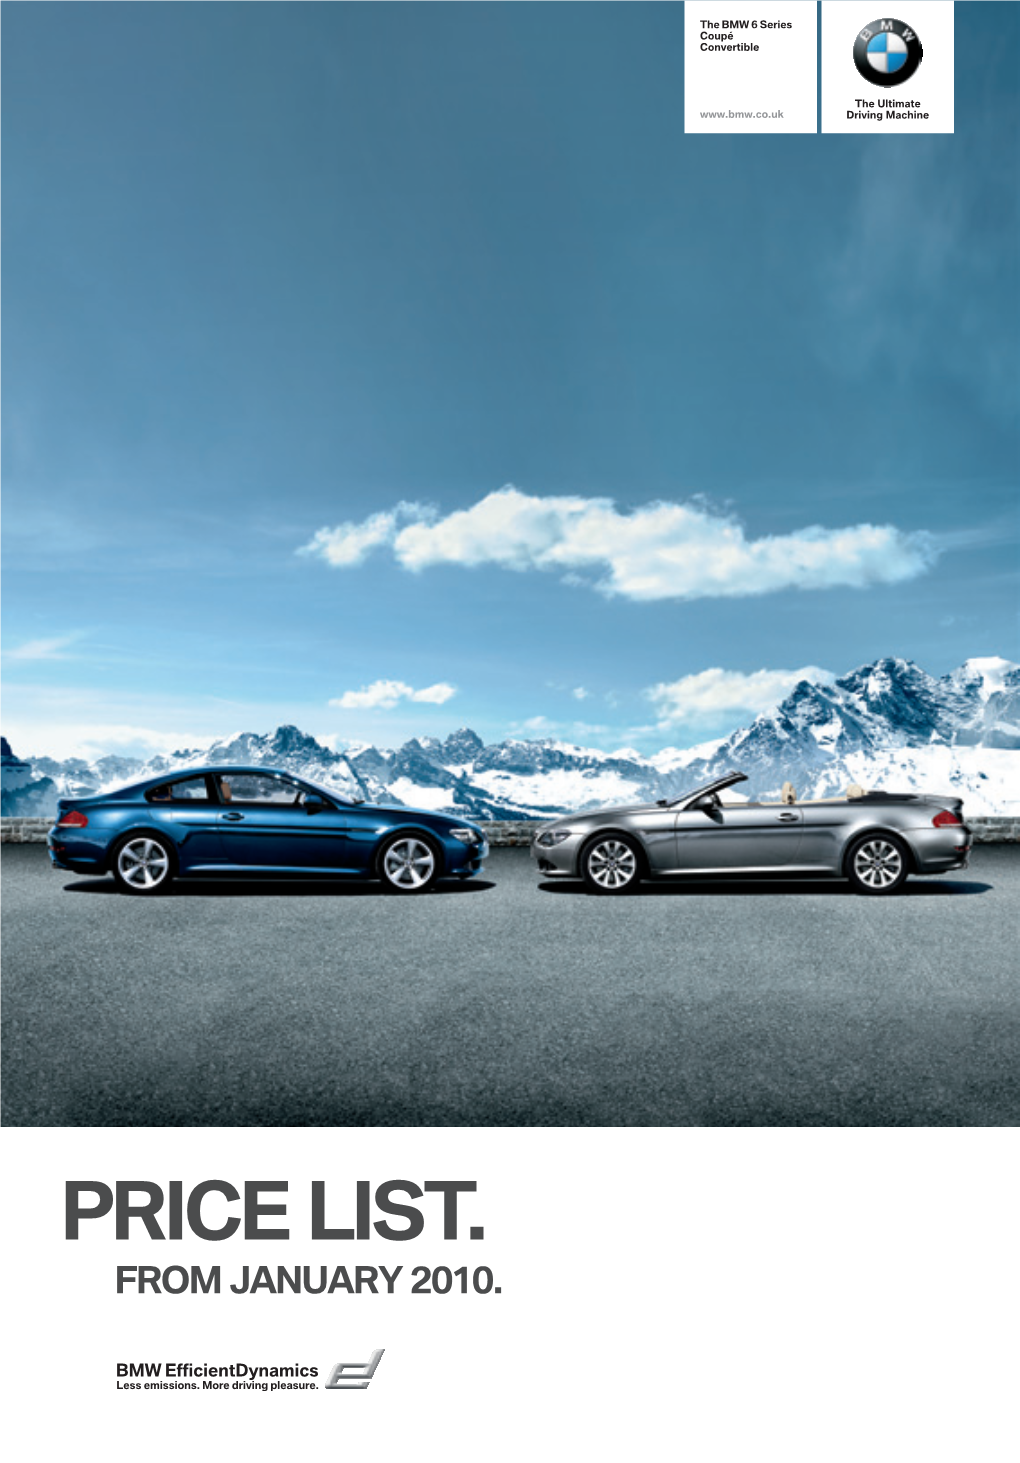 Bmw 6 Series Coupé and Convertible. Refining Sporting Refinement